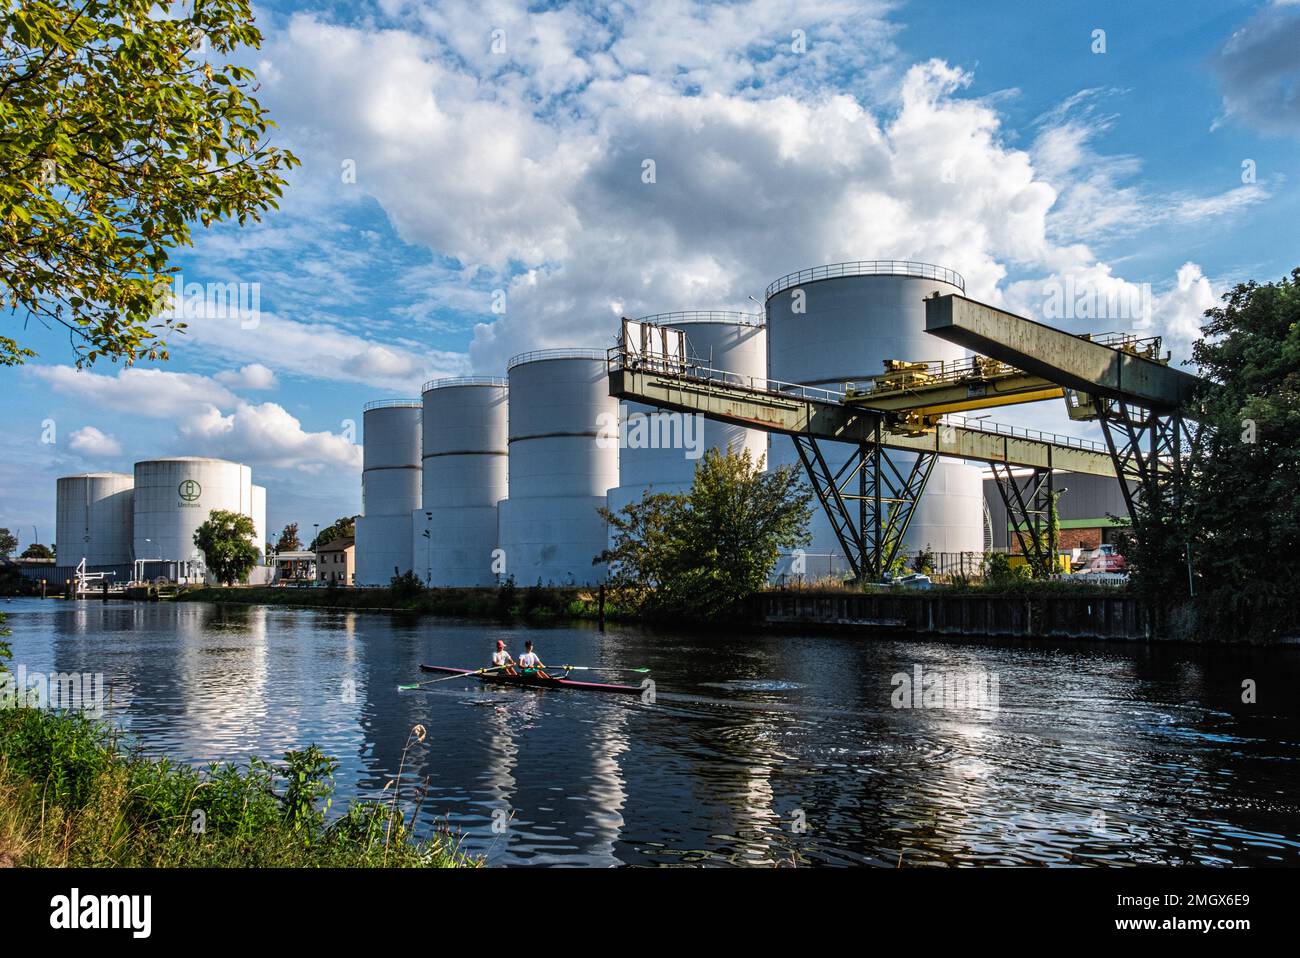 View from Johannisthal of Unitank Oil & diesel storage tanks & Facility on banks of Teltow Canal, Rudow Berlin Stock Photo